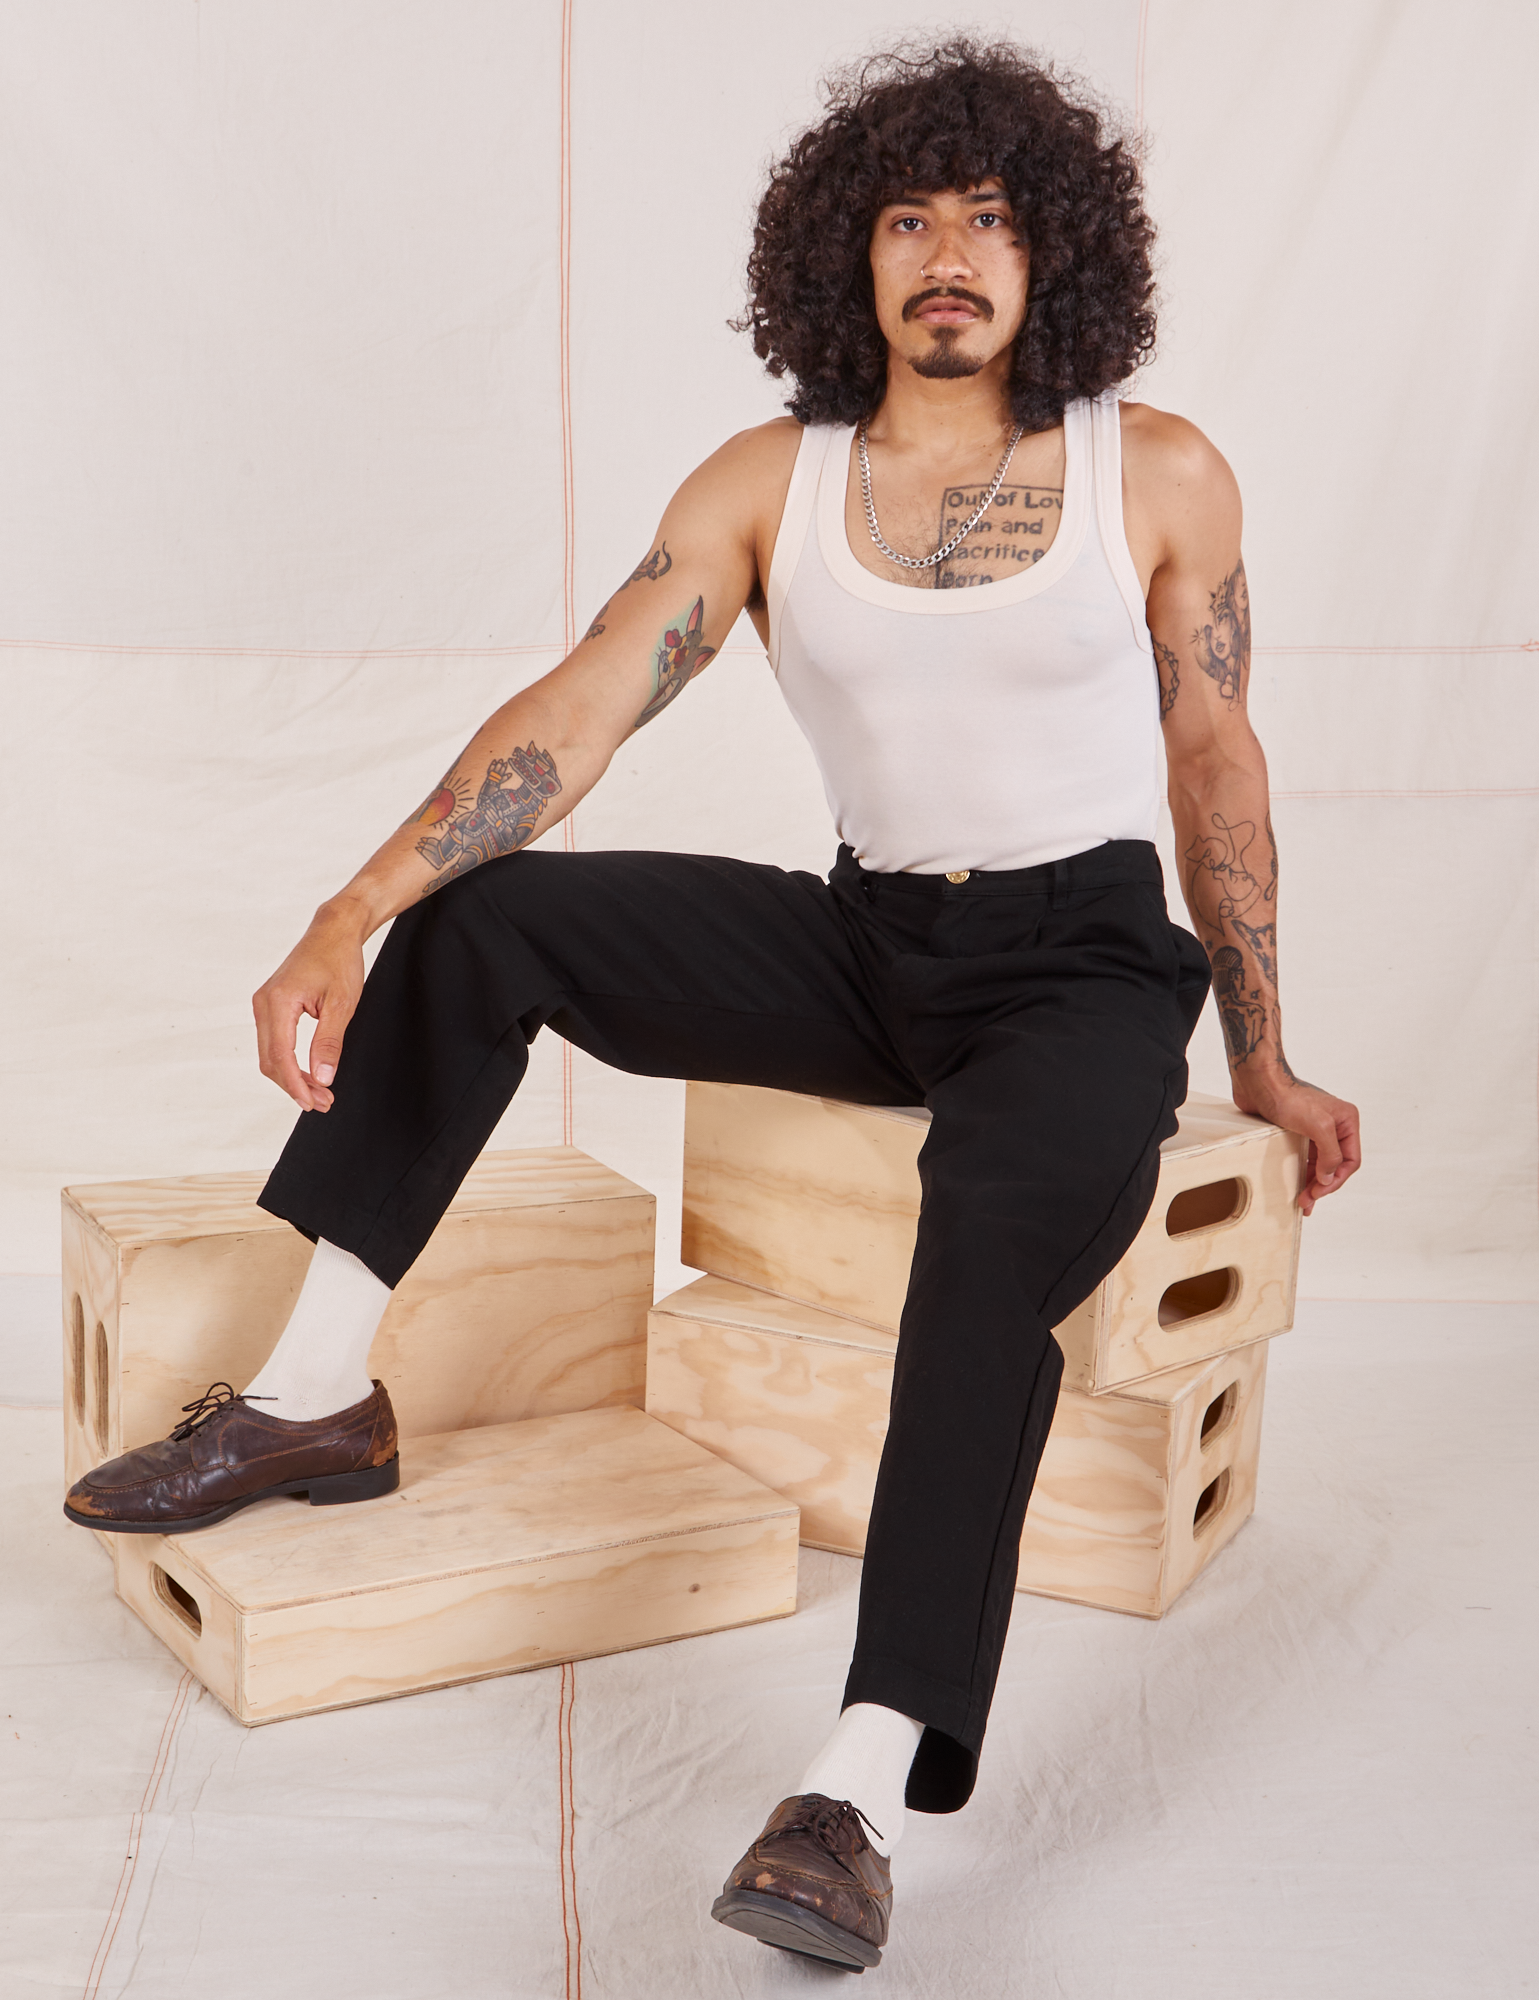 Jesse is sitting on a stack of wooden crates. They are wearing Denim Trouser Jeans in Black and a vintage off-white Tank Top